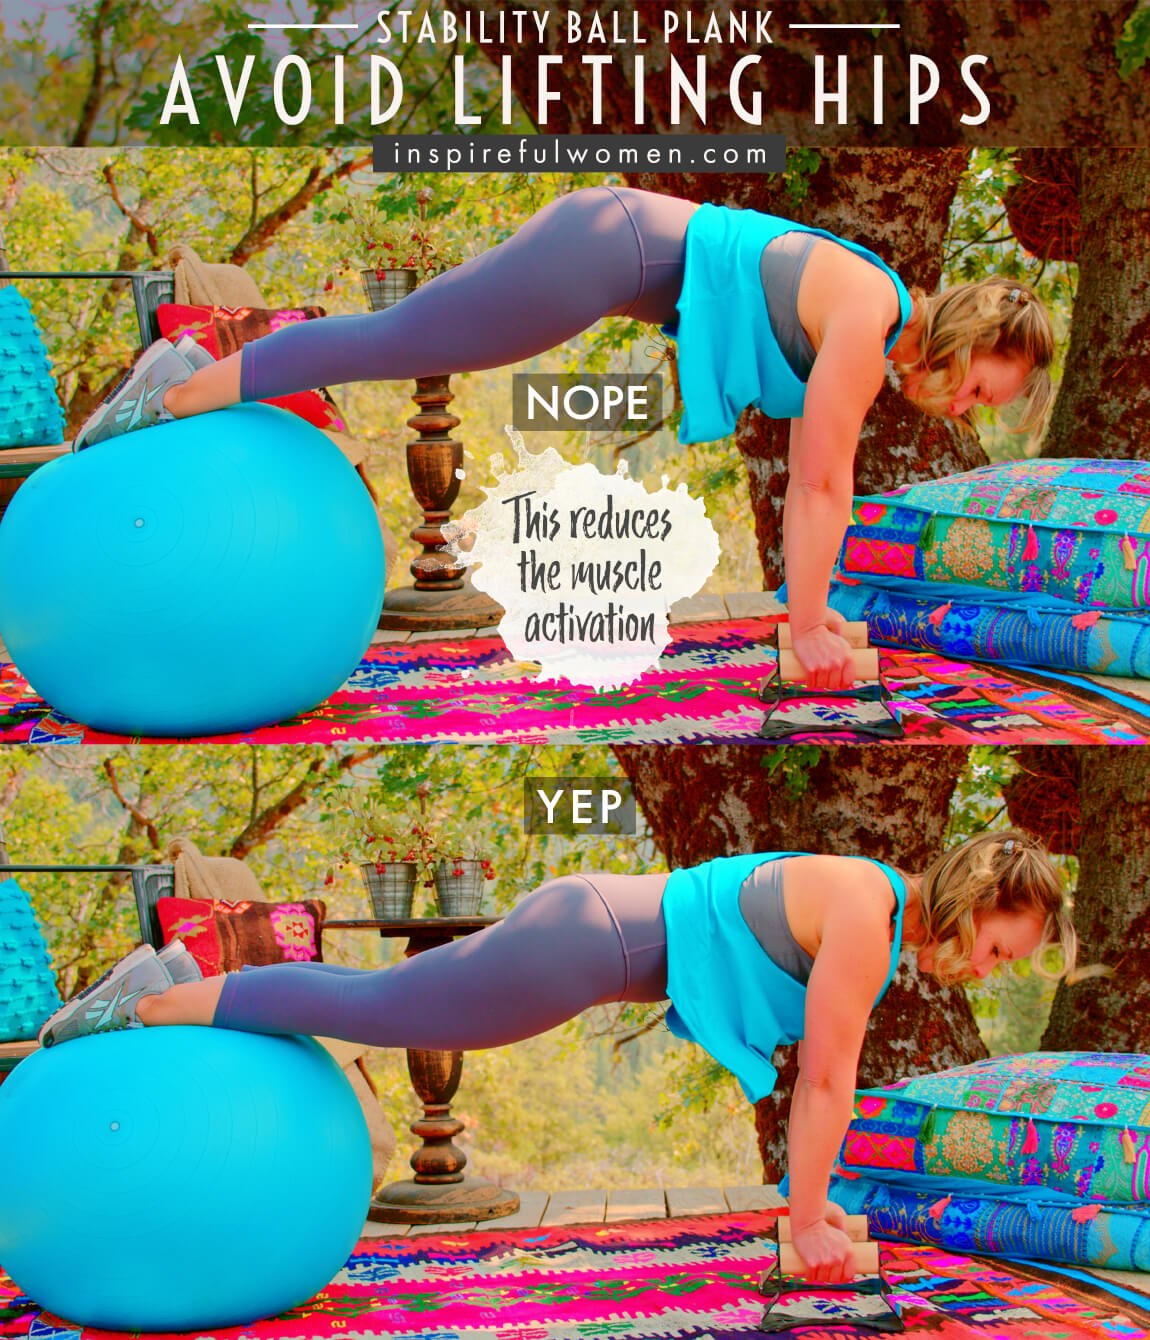 avoid-lifting-hips-stability-ball-plank-prone-neutral-spine-core-exercise-common-mistakes